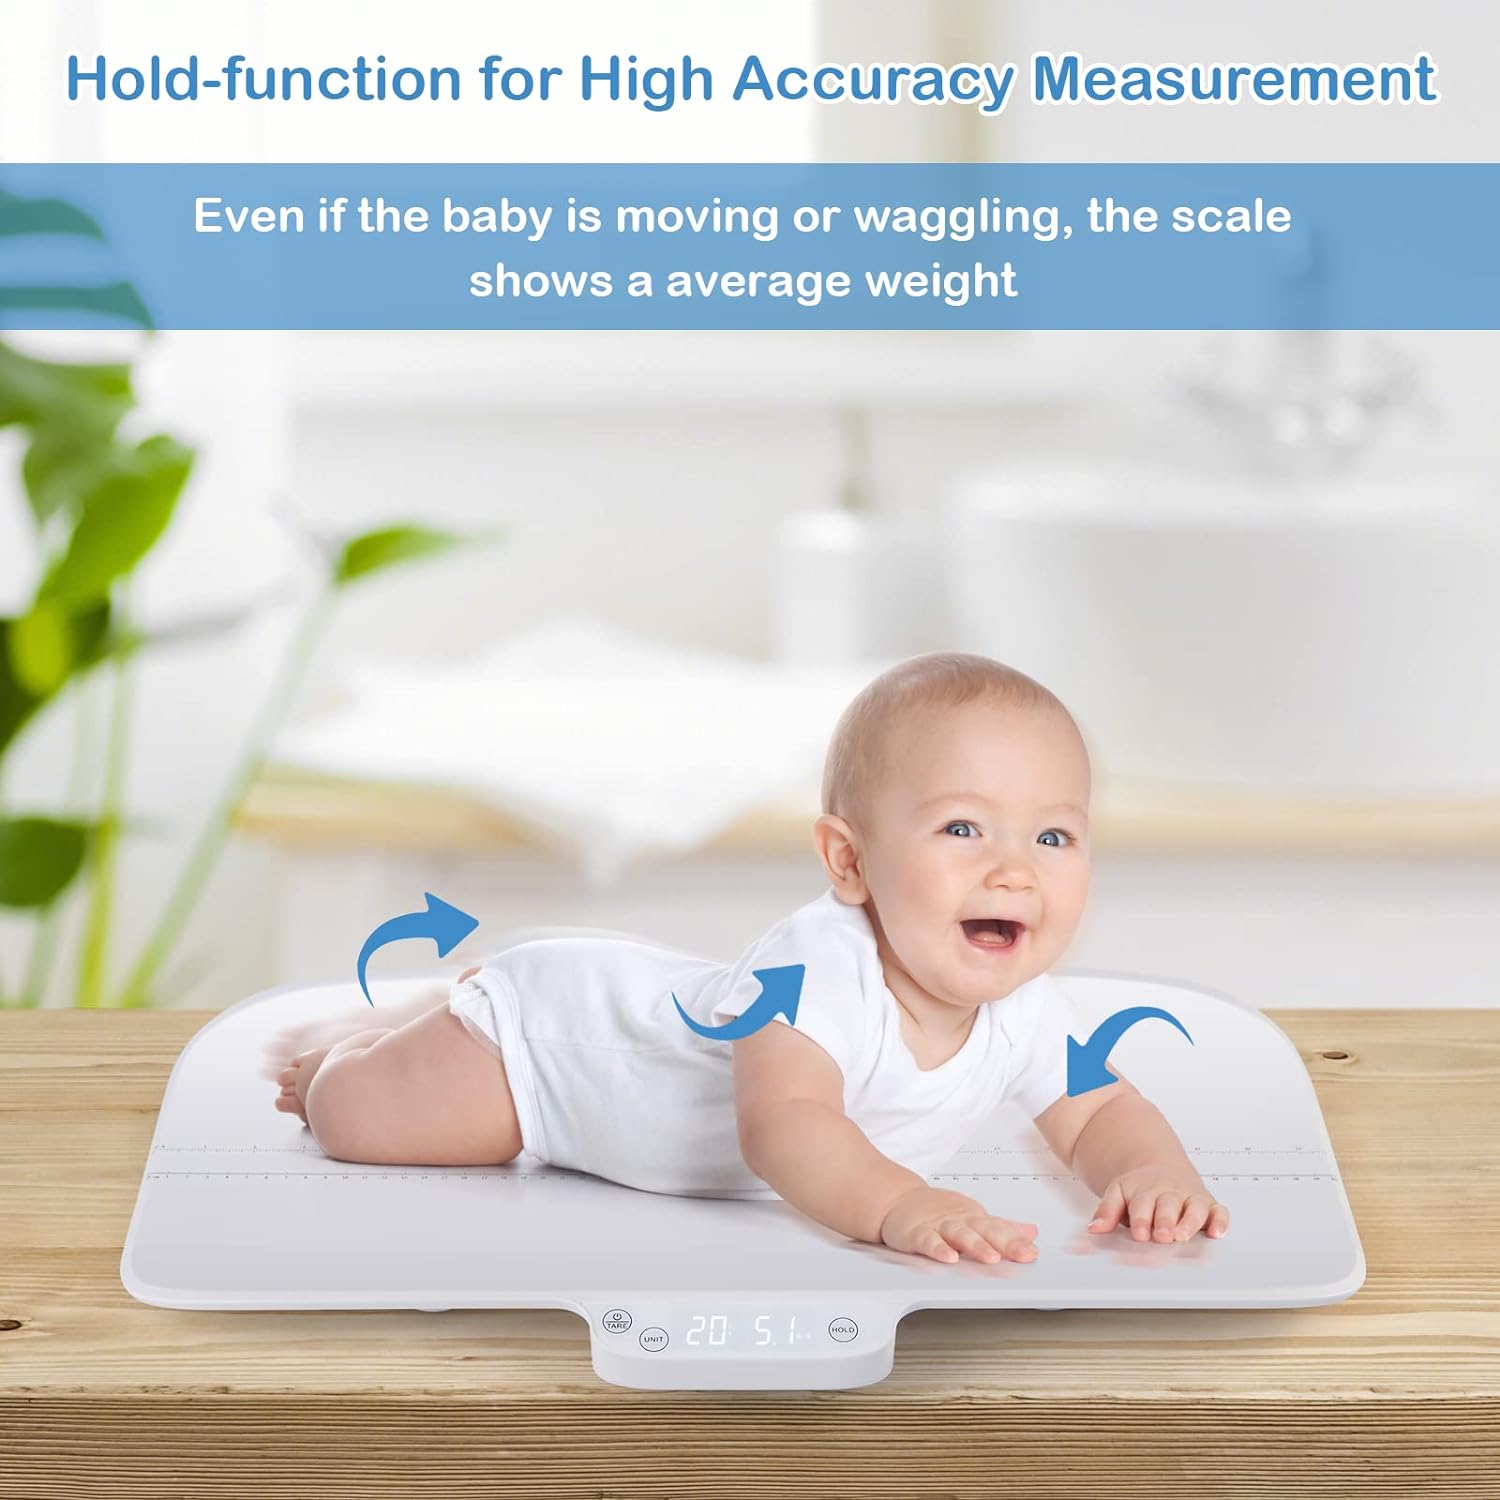 BABY JOY Baby Scale, Multifunctional Pet Scale with Digital LED Display, 4 Weighing Modes, Curved Tray, Rubber Feet, Weighing Scale for Newborn, Animals, High Precision at 0.1oz, Max Weight 66lbs : Baby